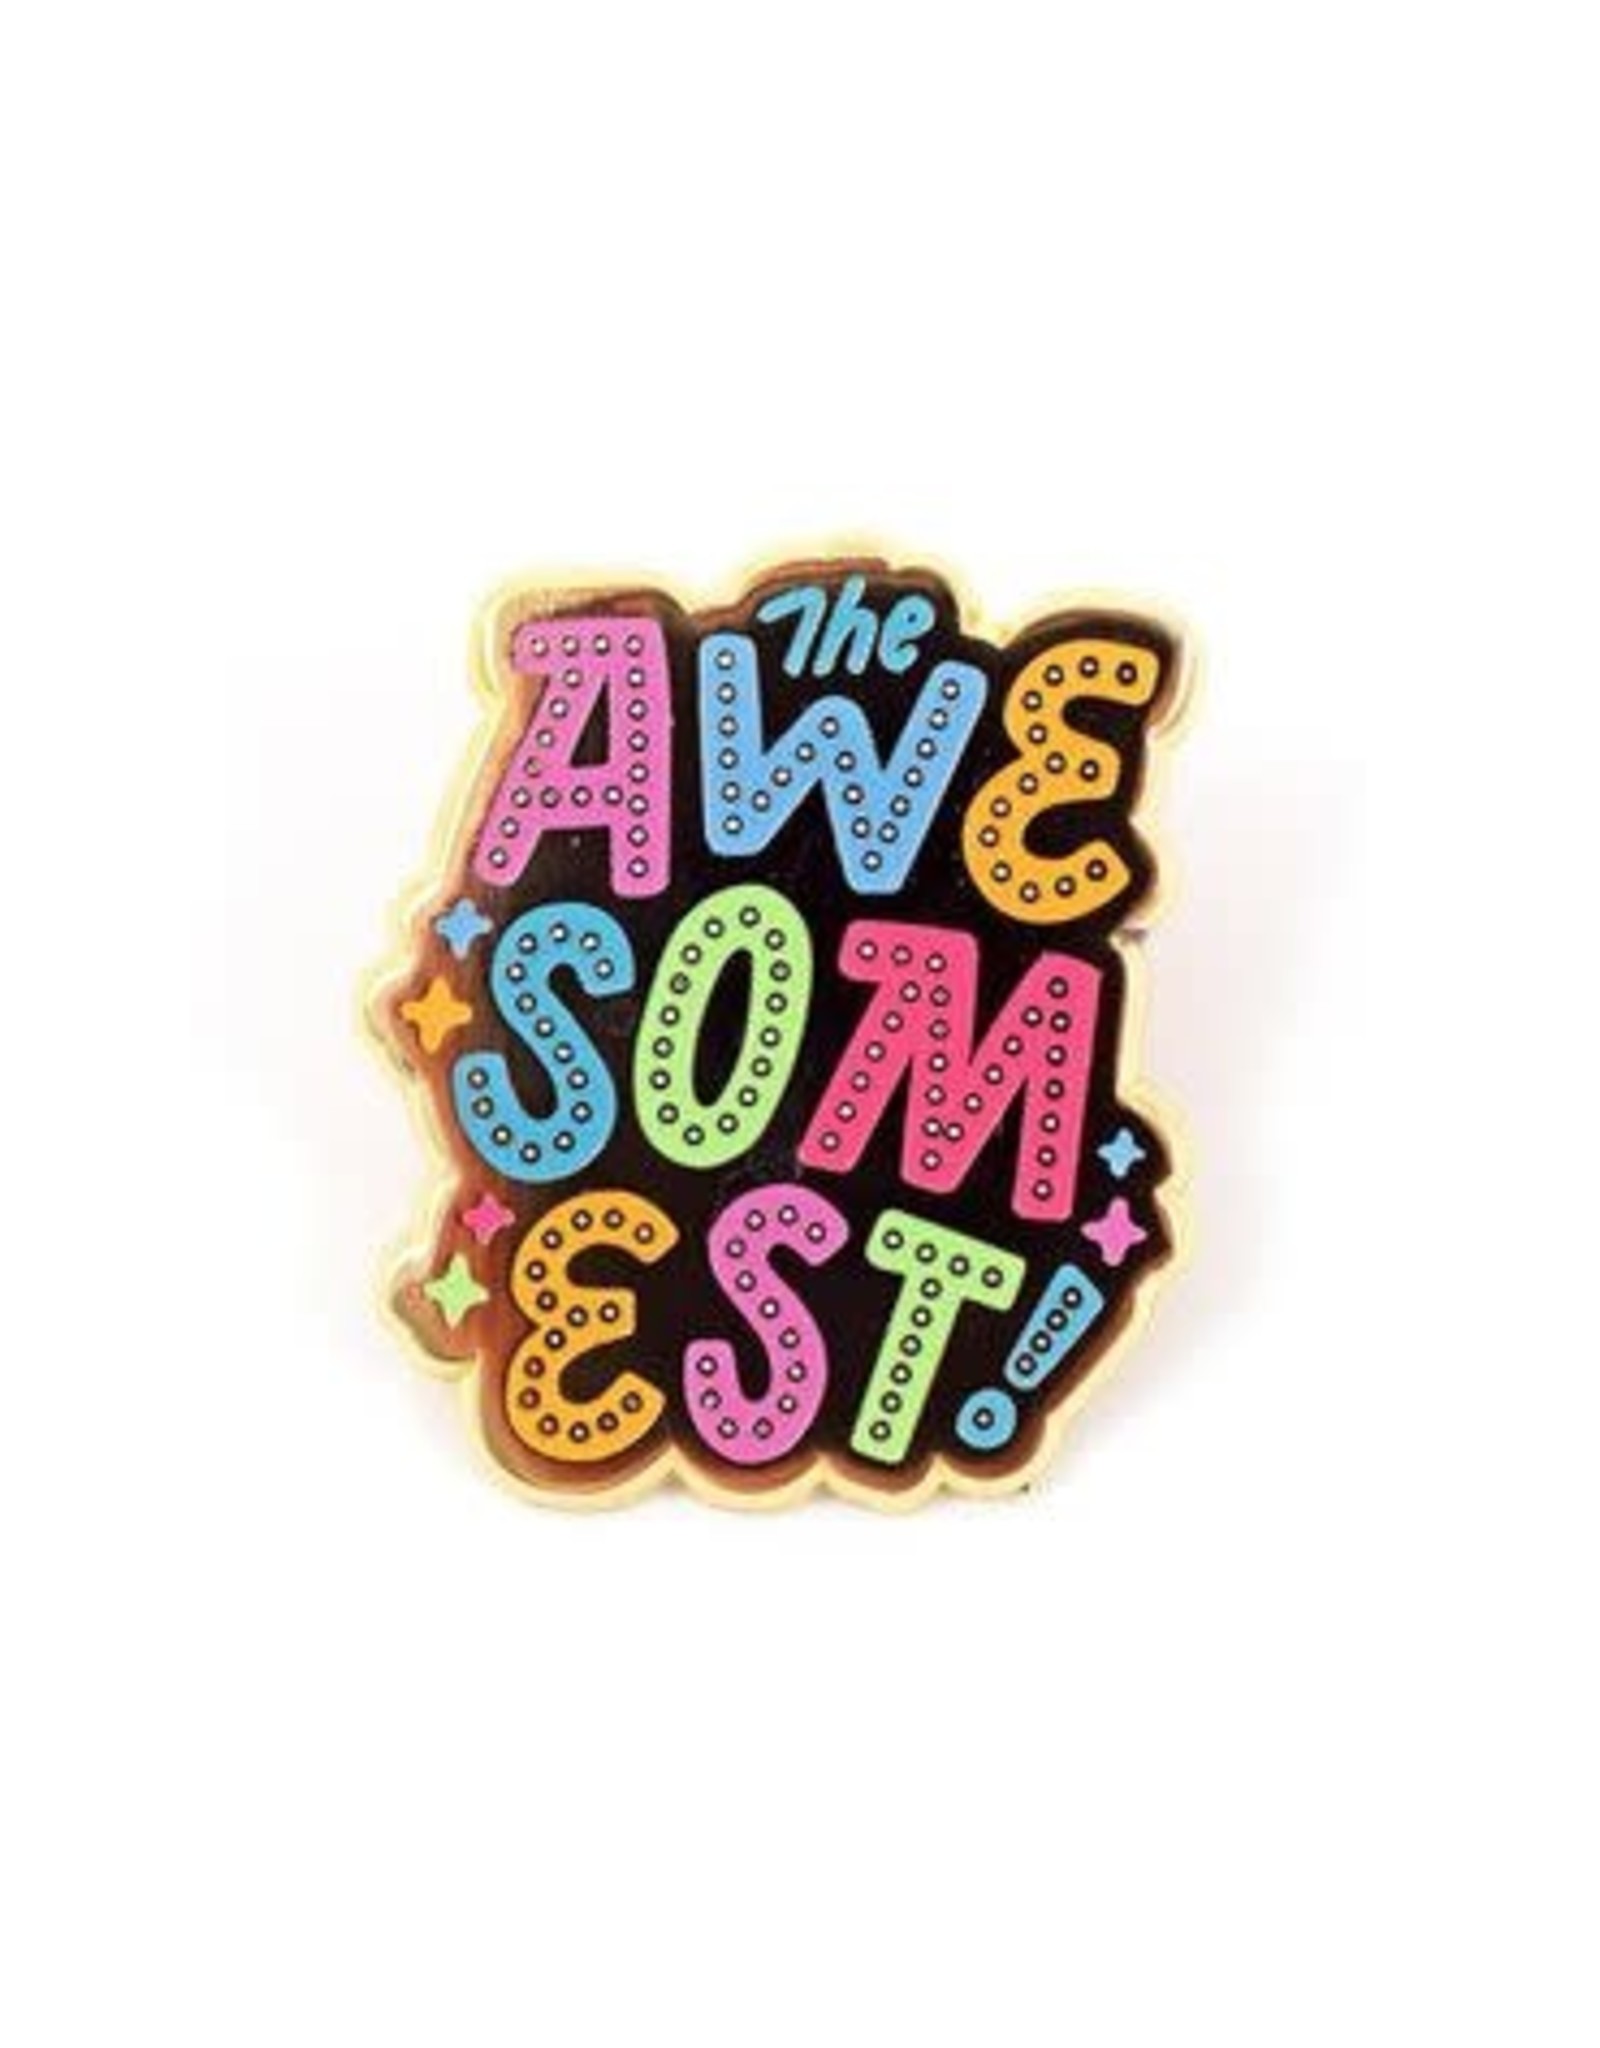 Valley Cruise Press "Congrats on Being so Awesome" Greeting Card + Enamel Pin - Valley Cruise Press